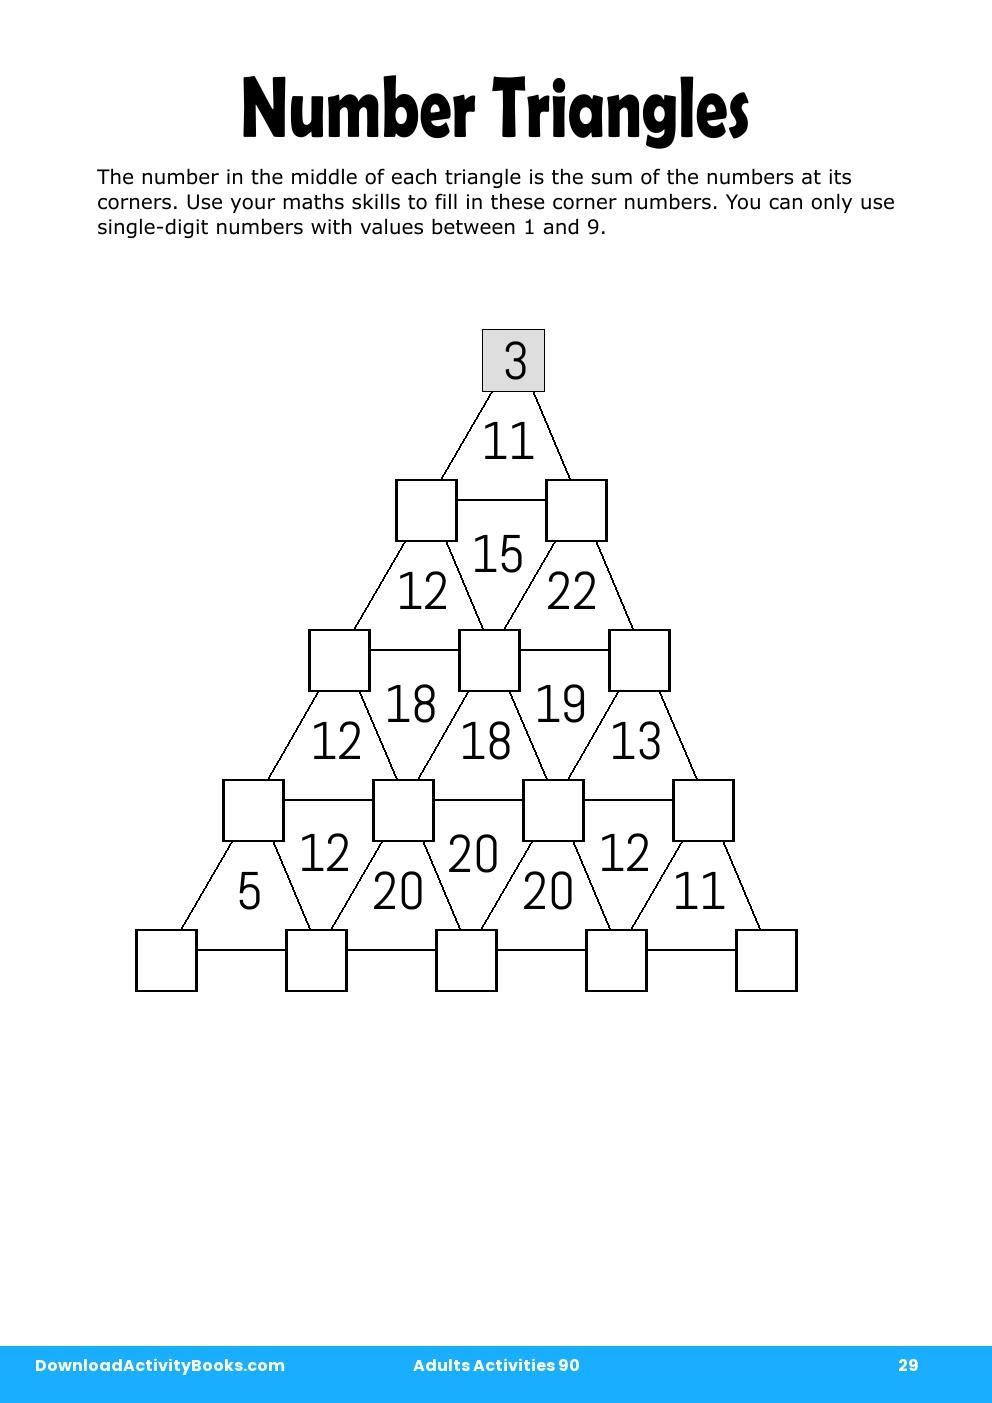 Number Triangles in Adults Activities 90